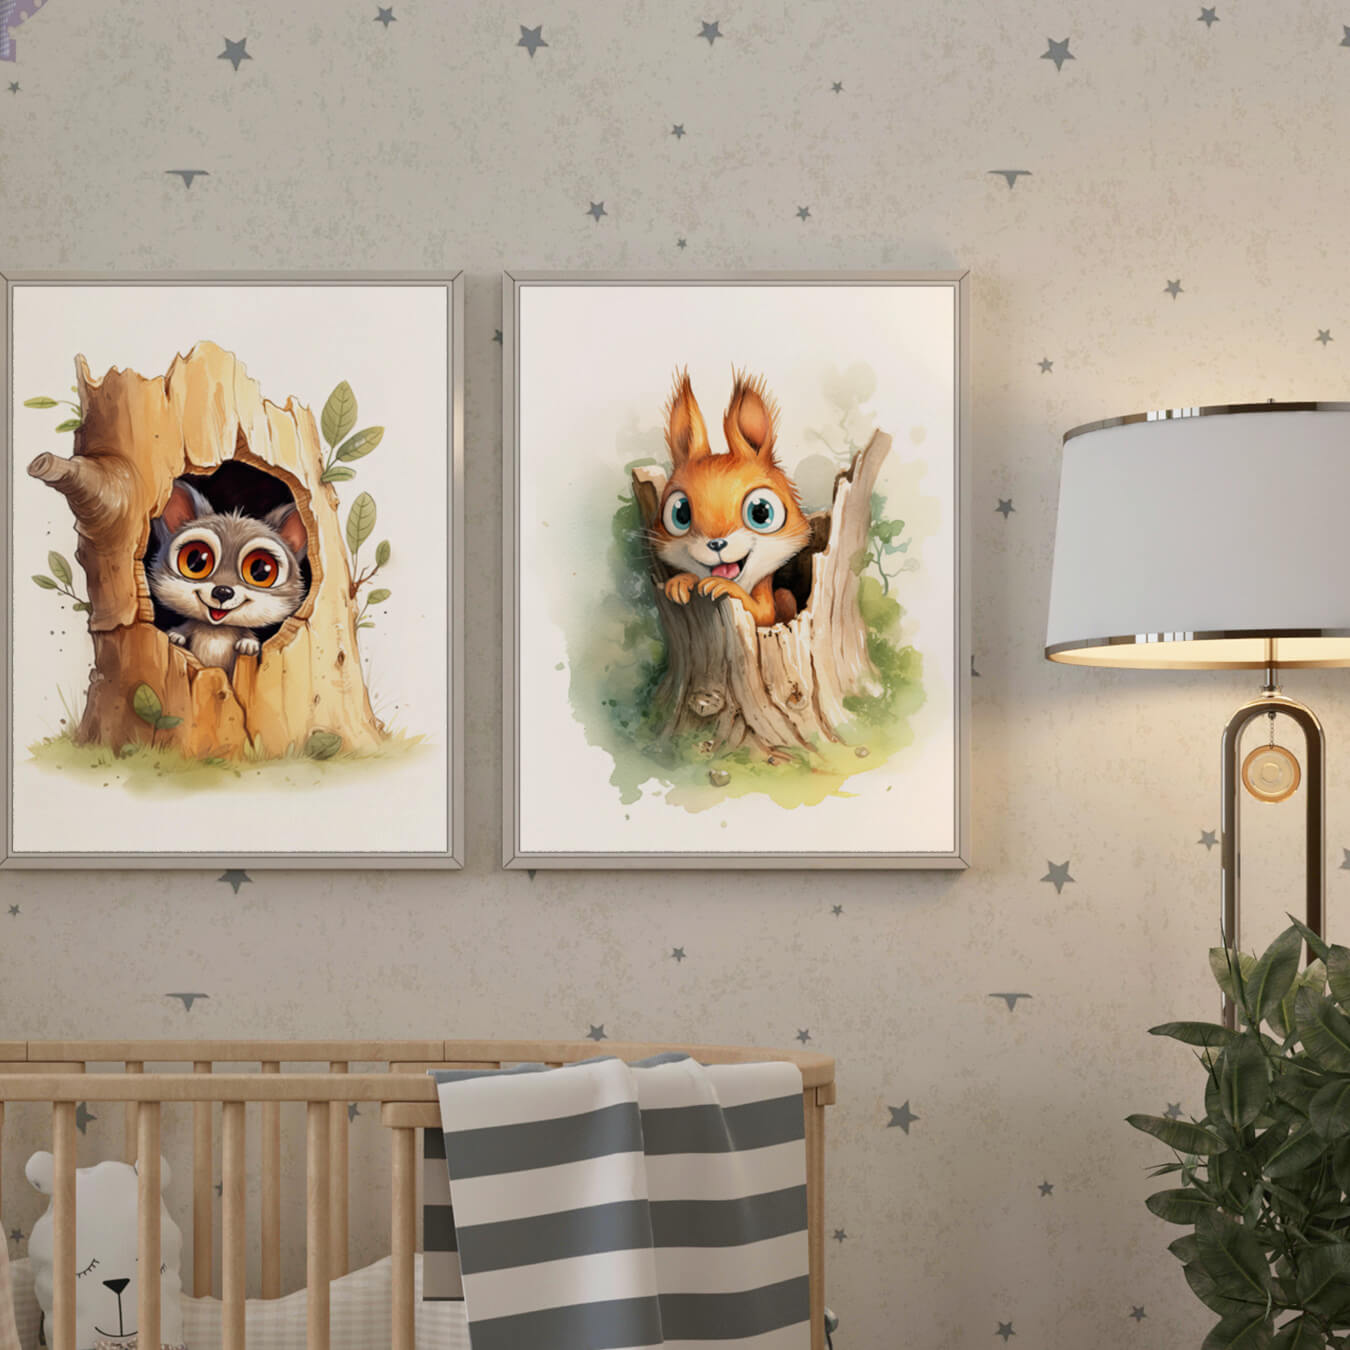 Playful Little Wolf And Squirrel - Digital Wall Art Set Of 2